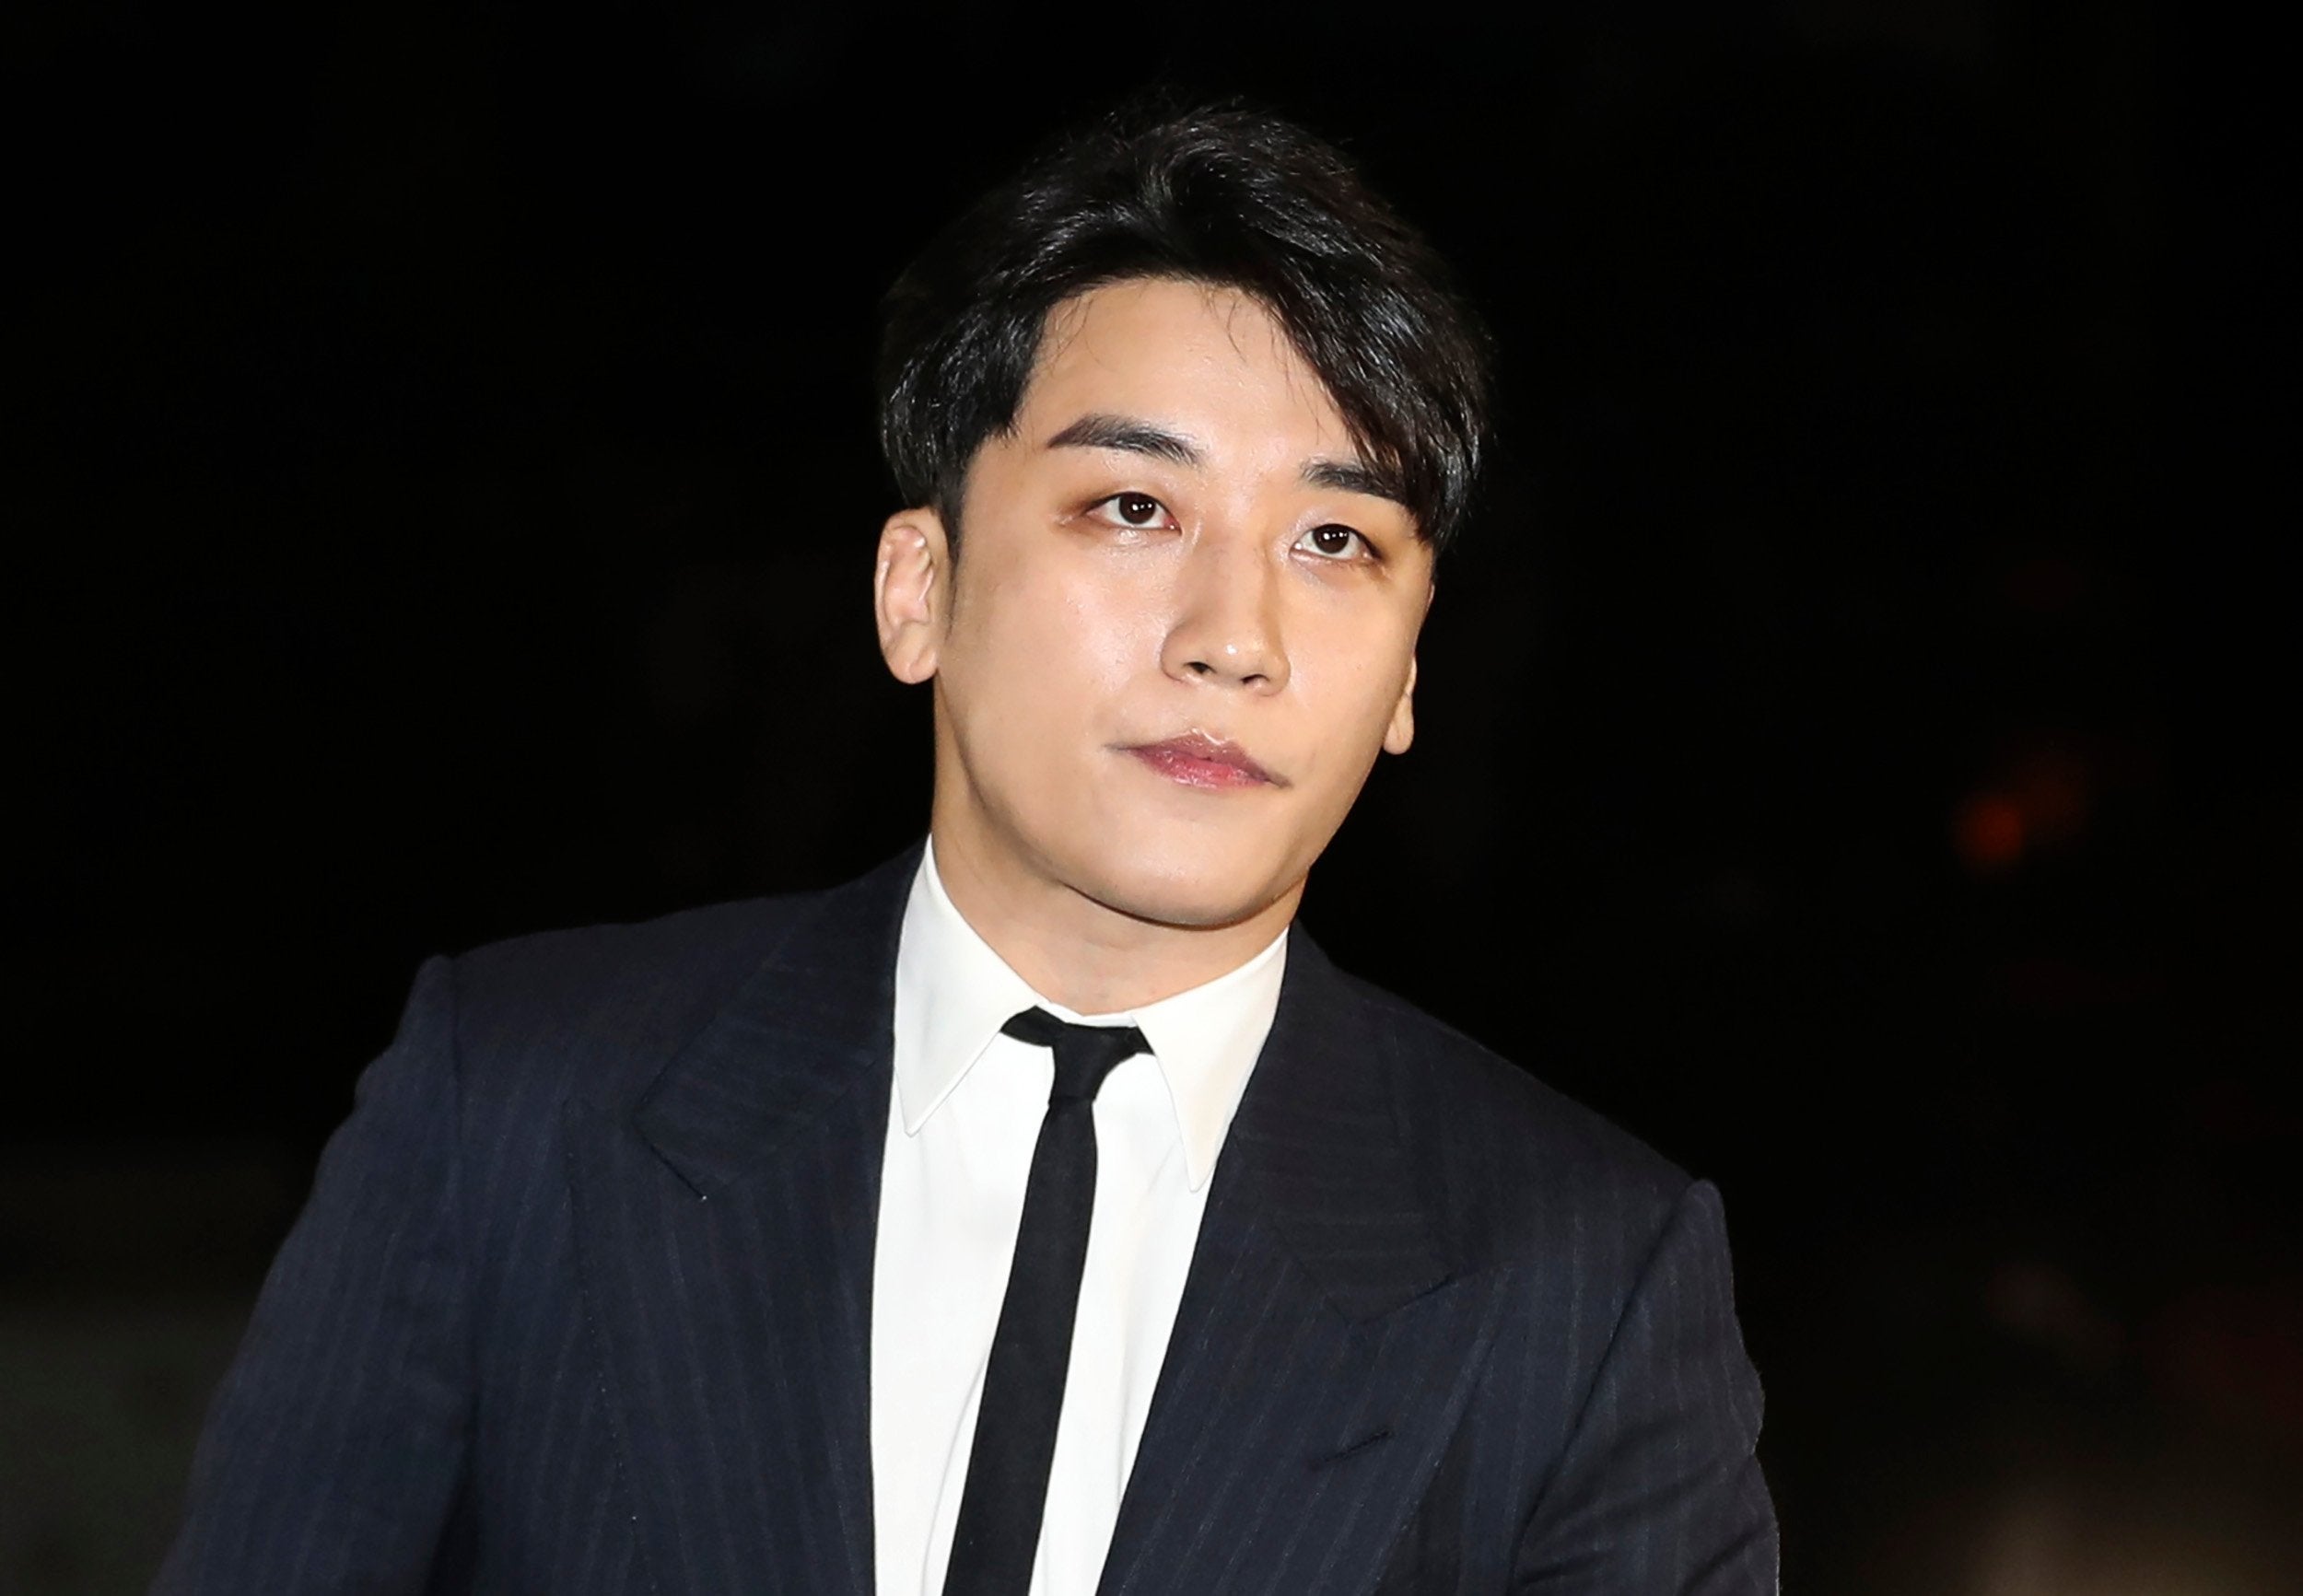 Seungri scandal: K-pop star retires from music after being charged with